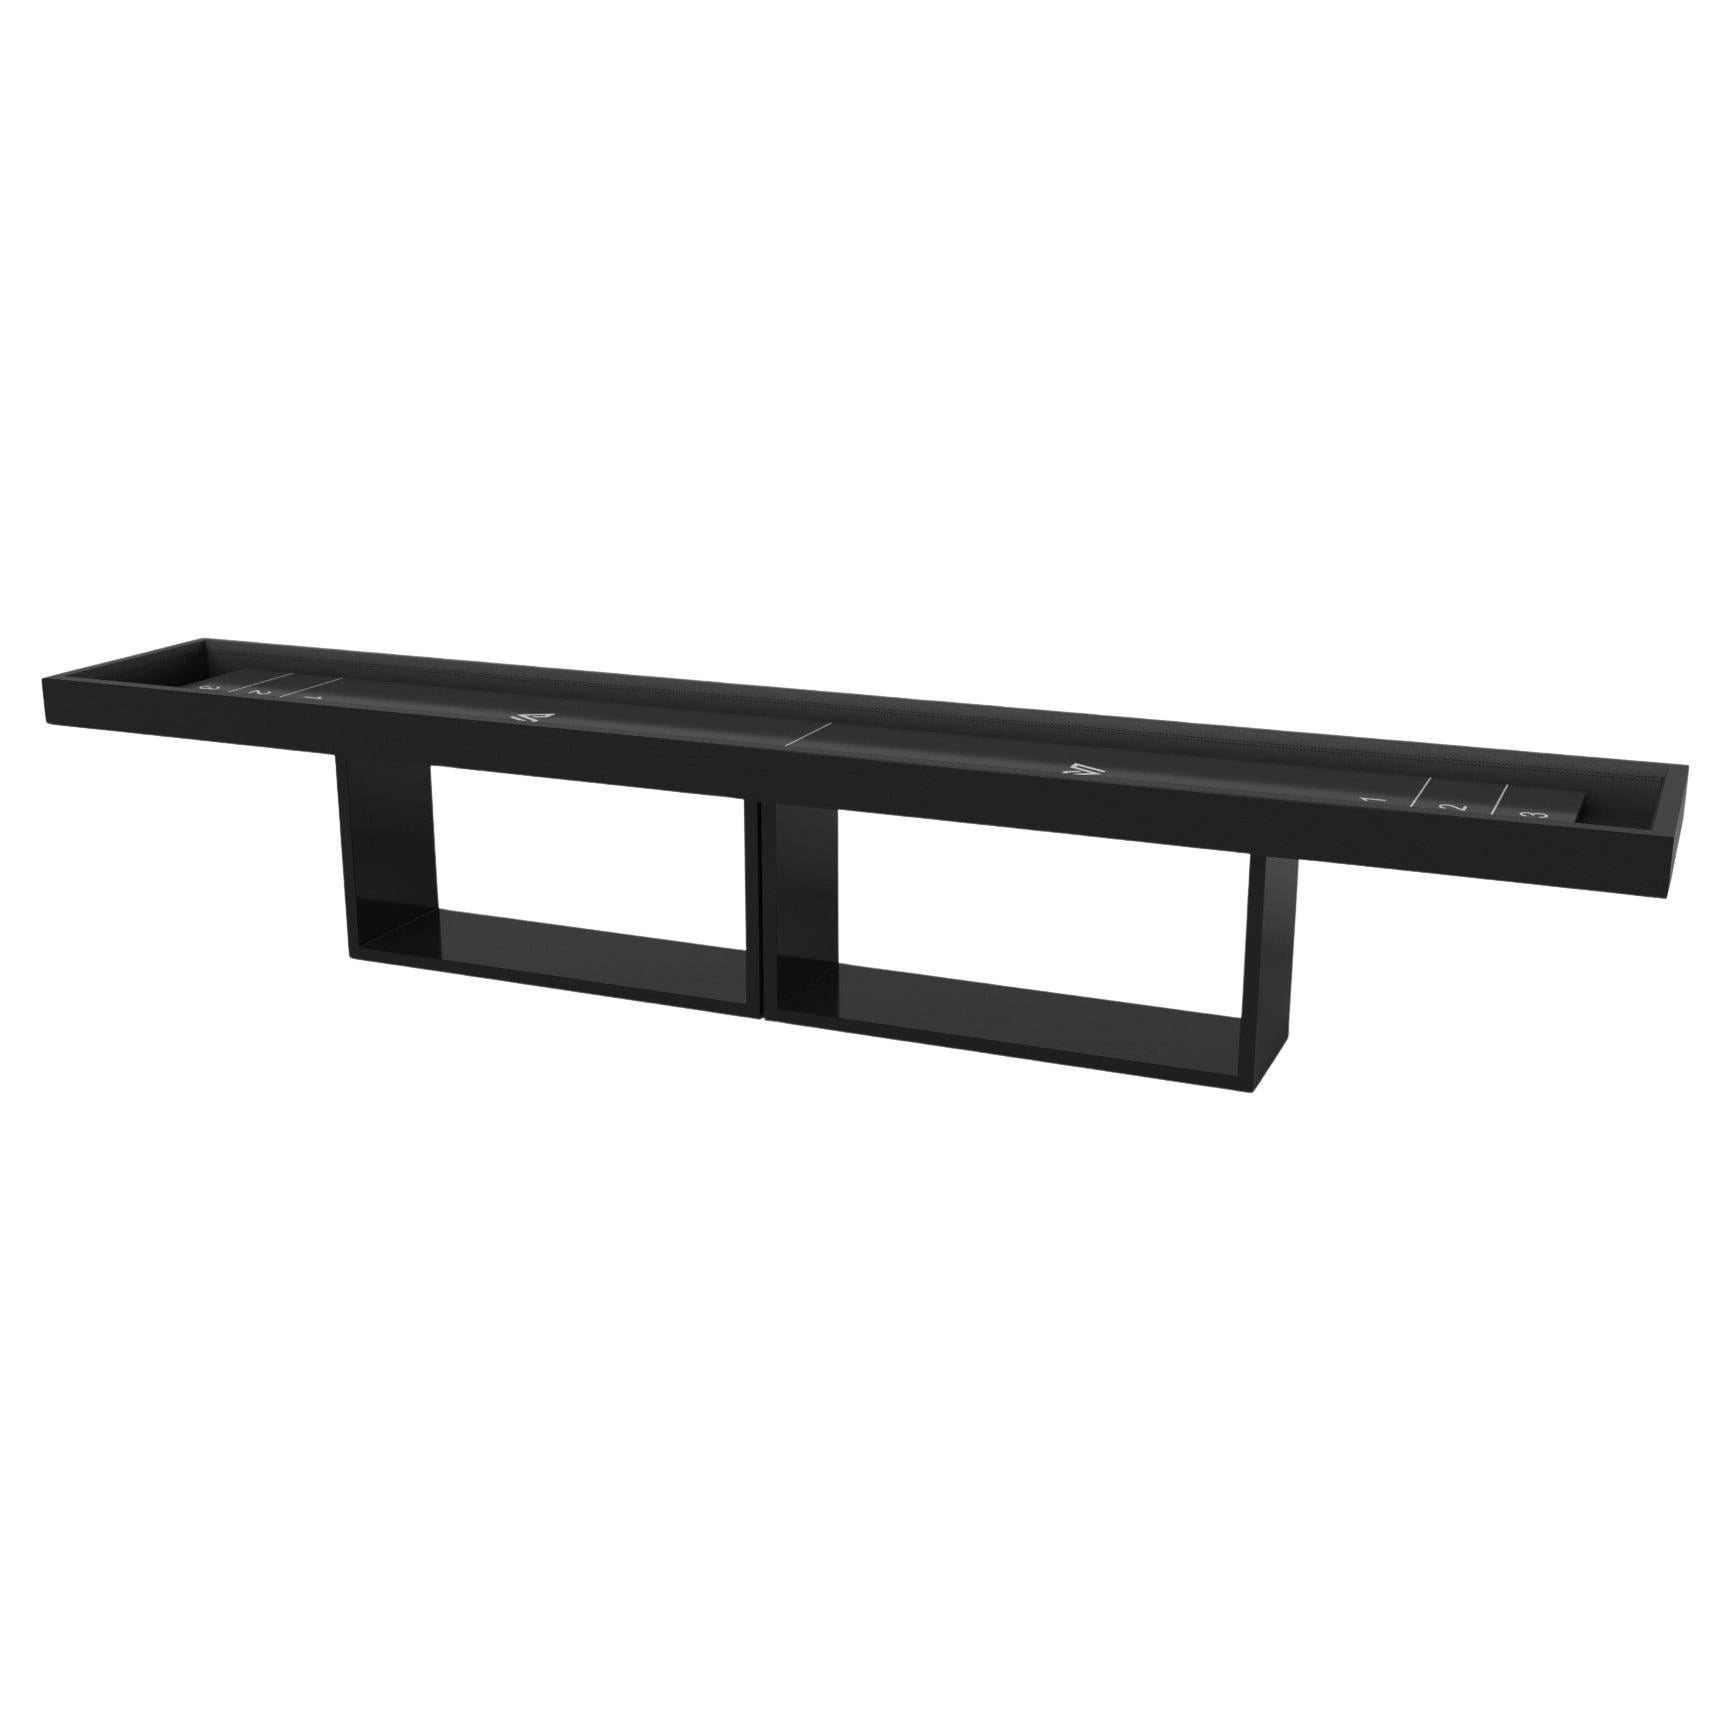 Elevate Customs Ambrosia Shuffleboard Tables/Solid Pantone Black Color in 9'-USA For Sale